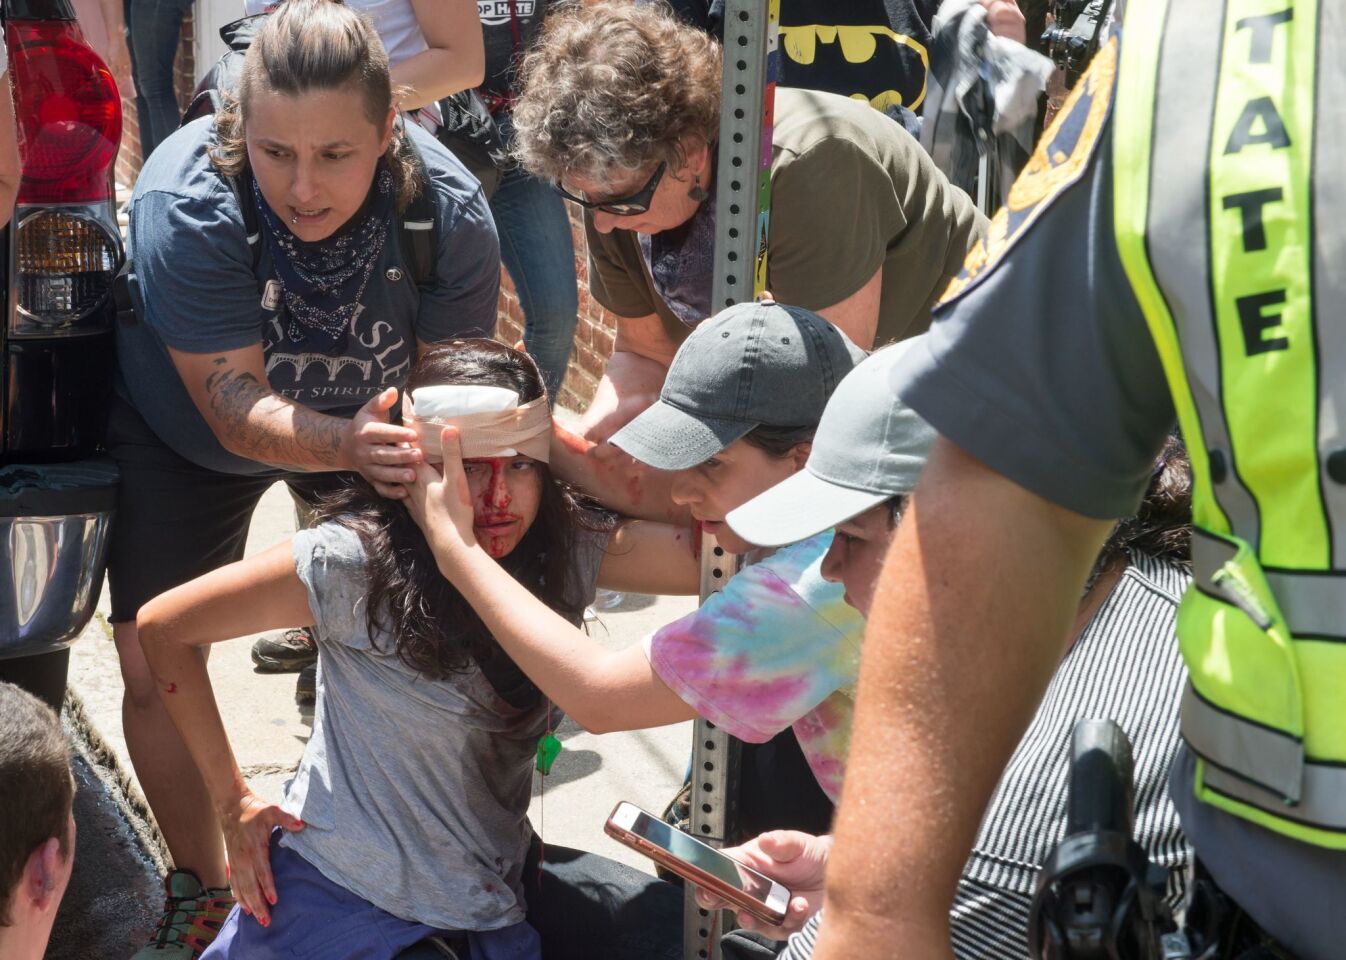 People receive first aid after a car plowed into a crowd of protesters in Charlottesville, Va.